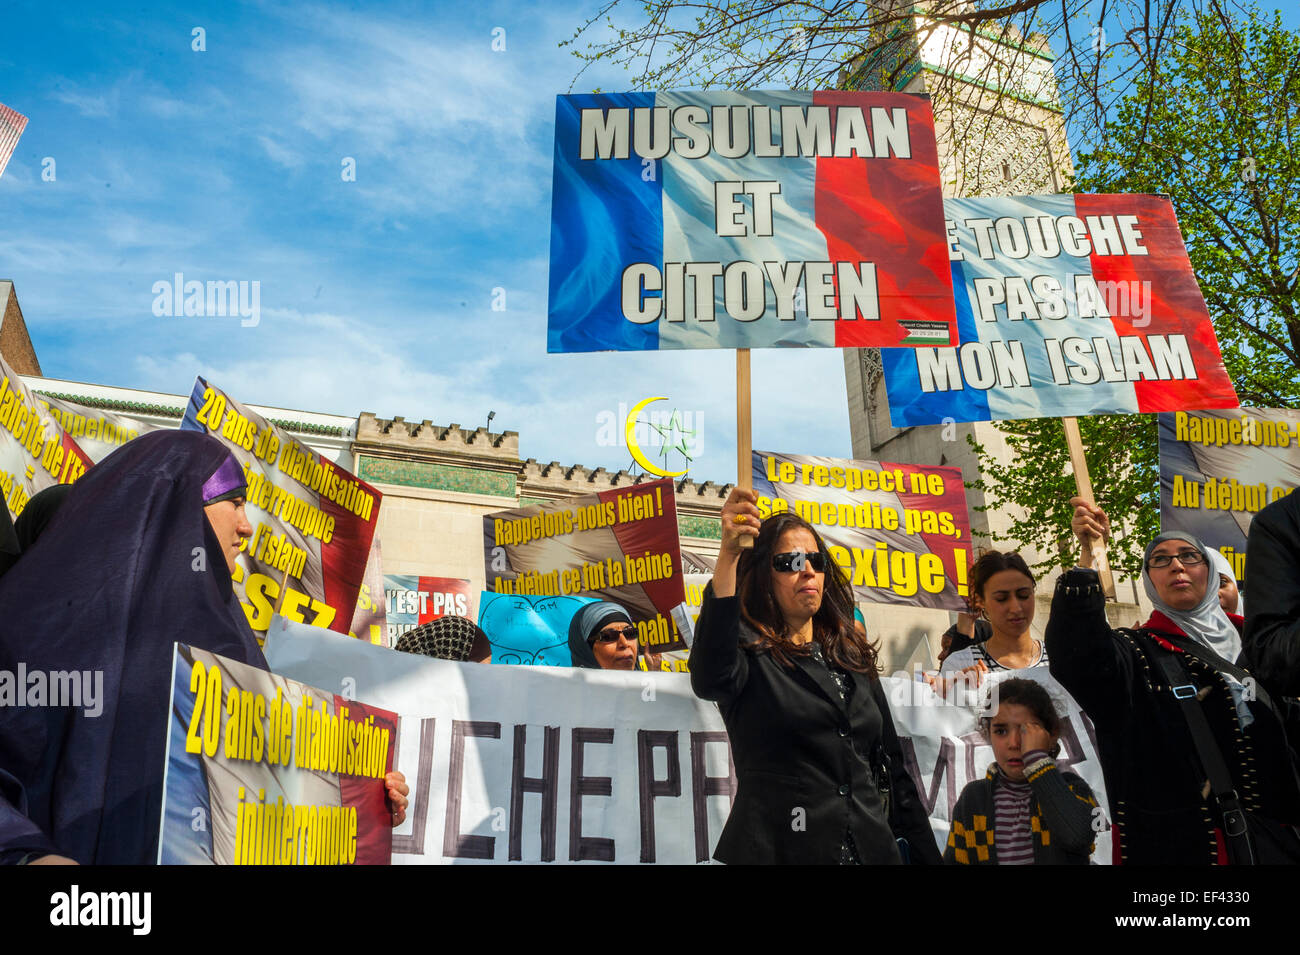 Paris, France, French Arab Muslims Demonstrating against Islamophobia, Racism, Women in traditional Dress Hijab, Holding Protest Signs and Banners, at Grande Mosque Rally, people march street, religion in politics Stock Photo